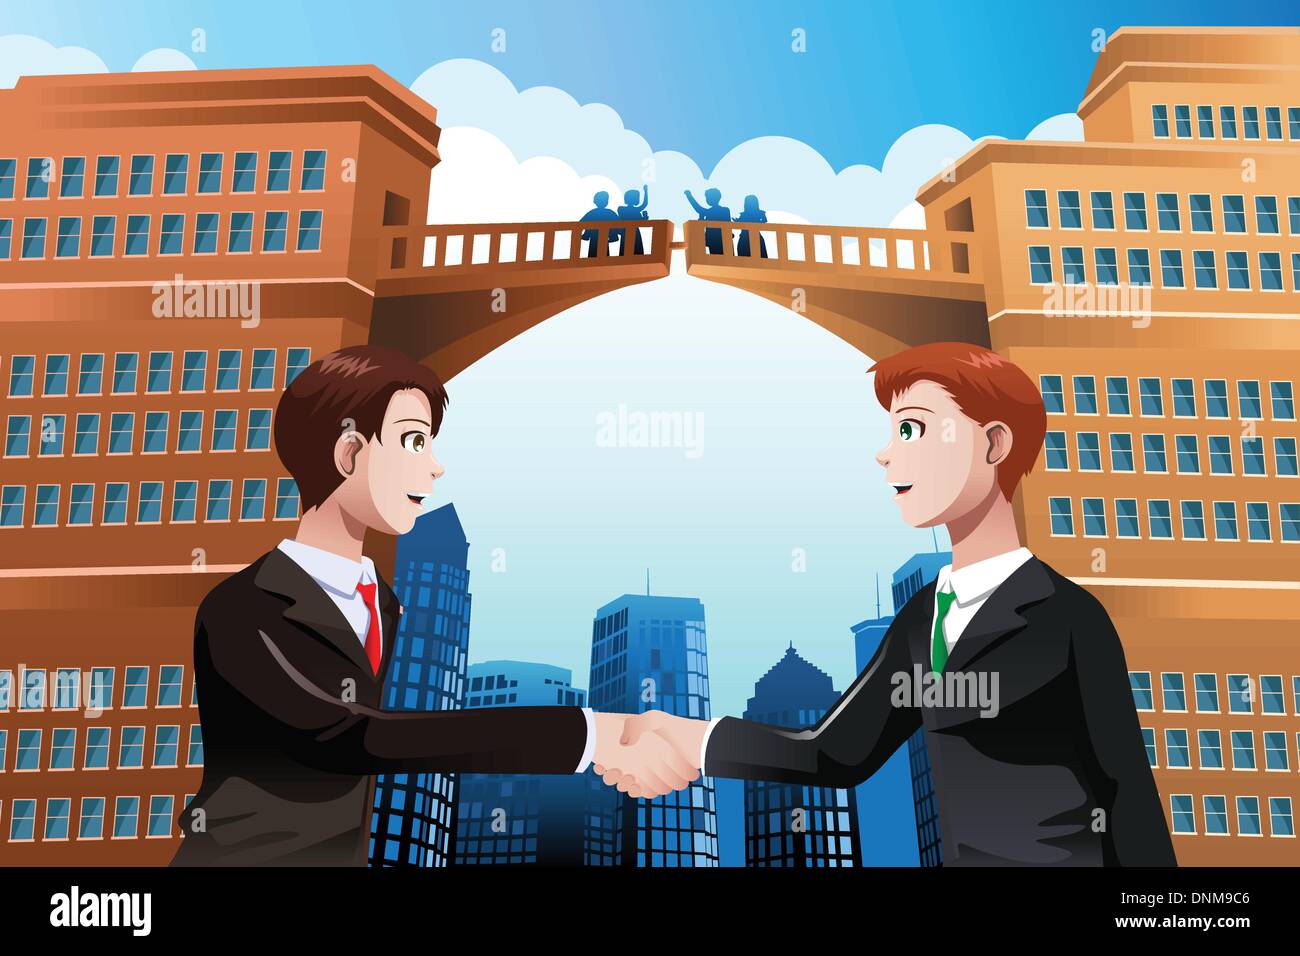 A vector illustration of business merger concept Stock Vector